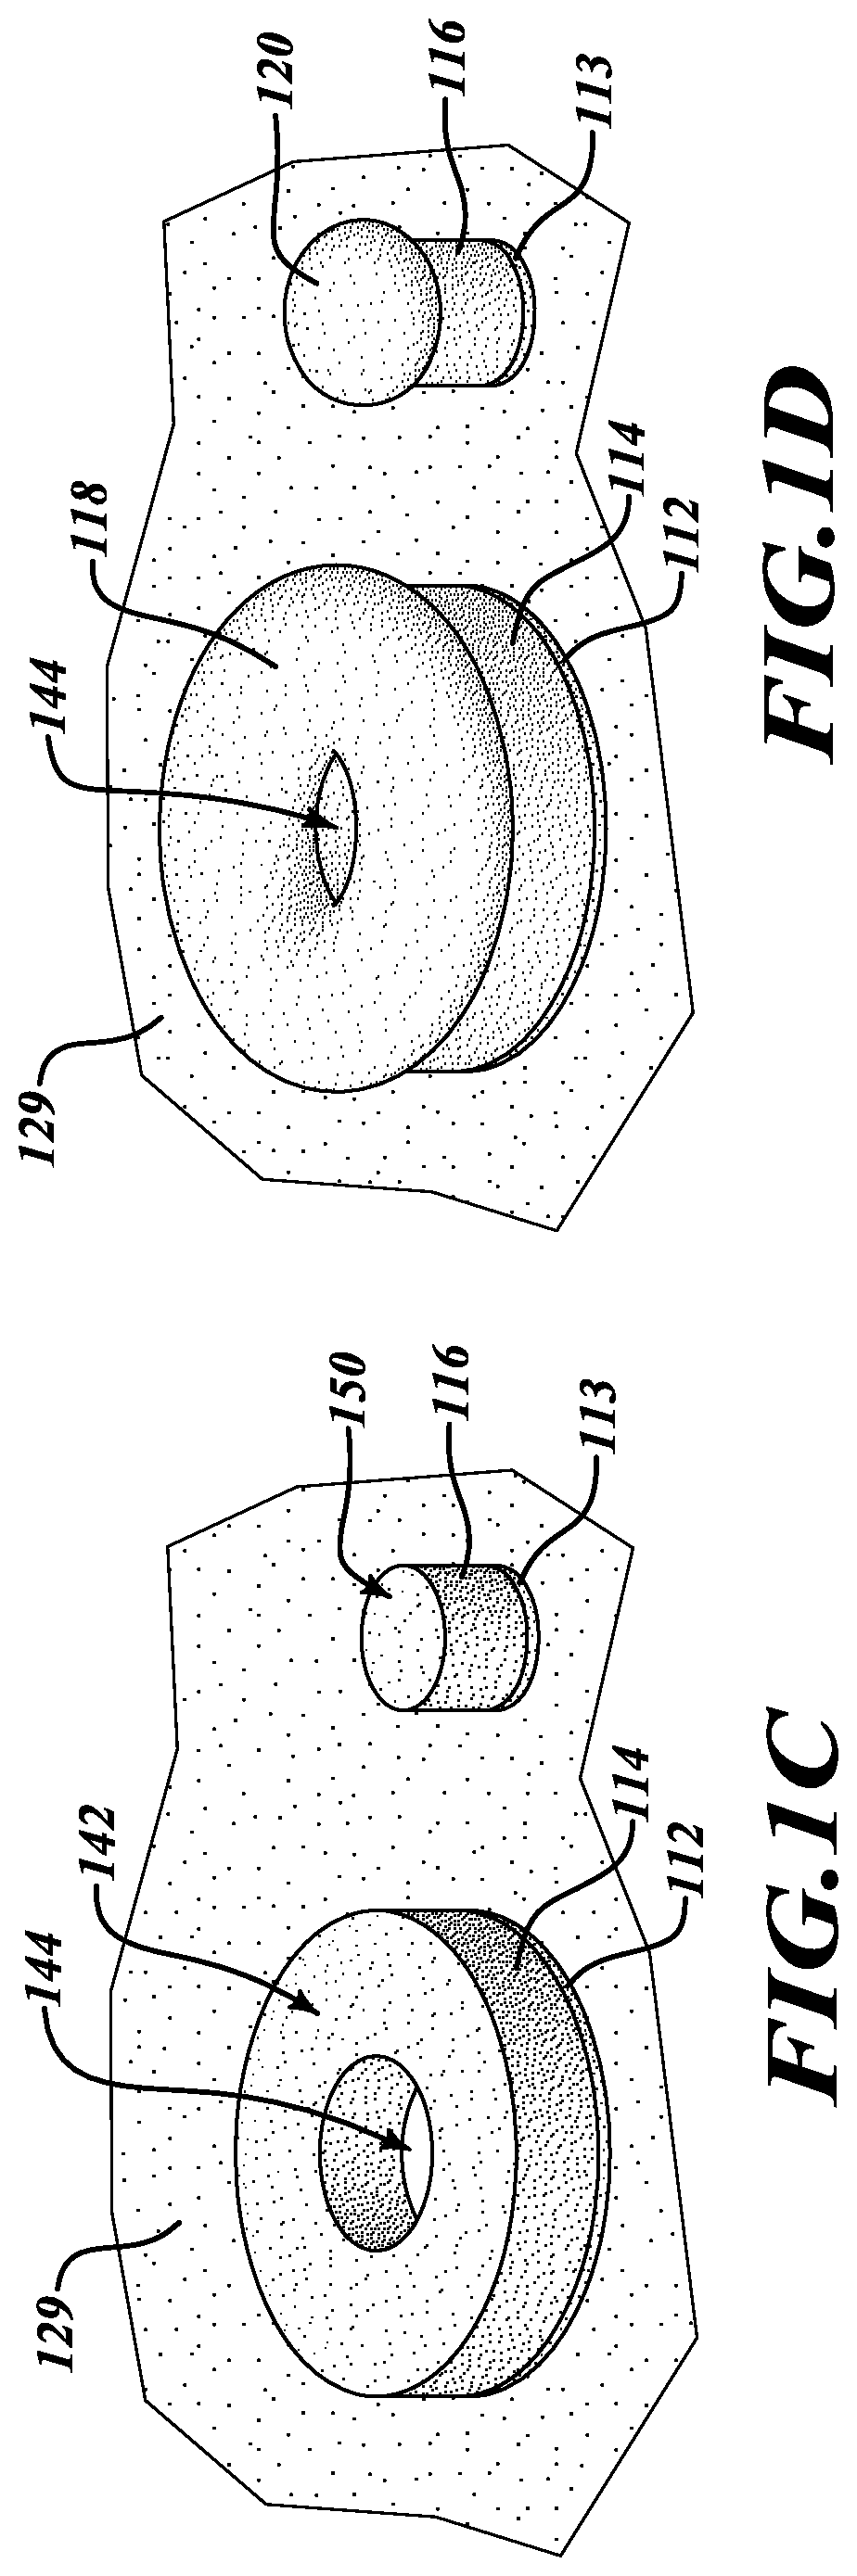 Coplanar bump contacts of differing sizes